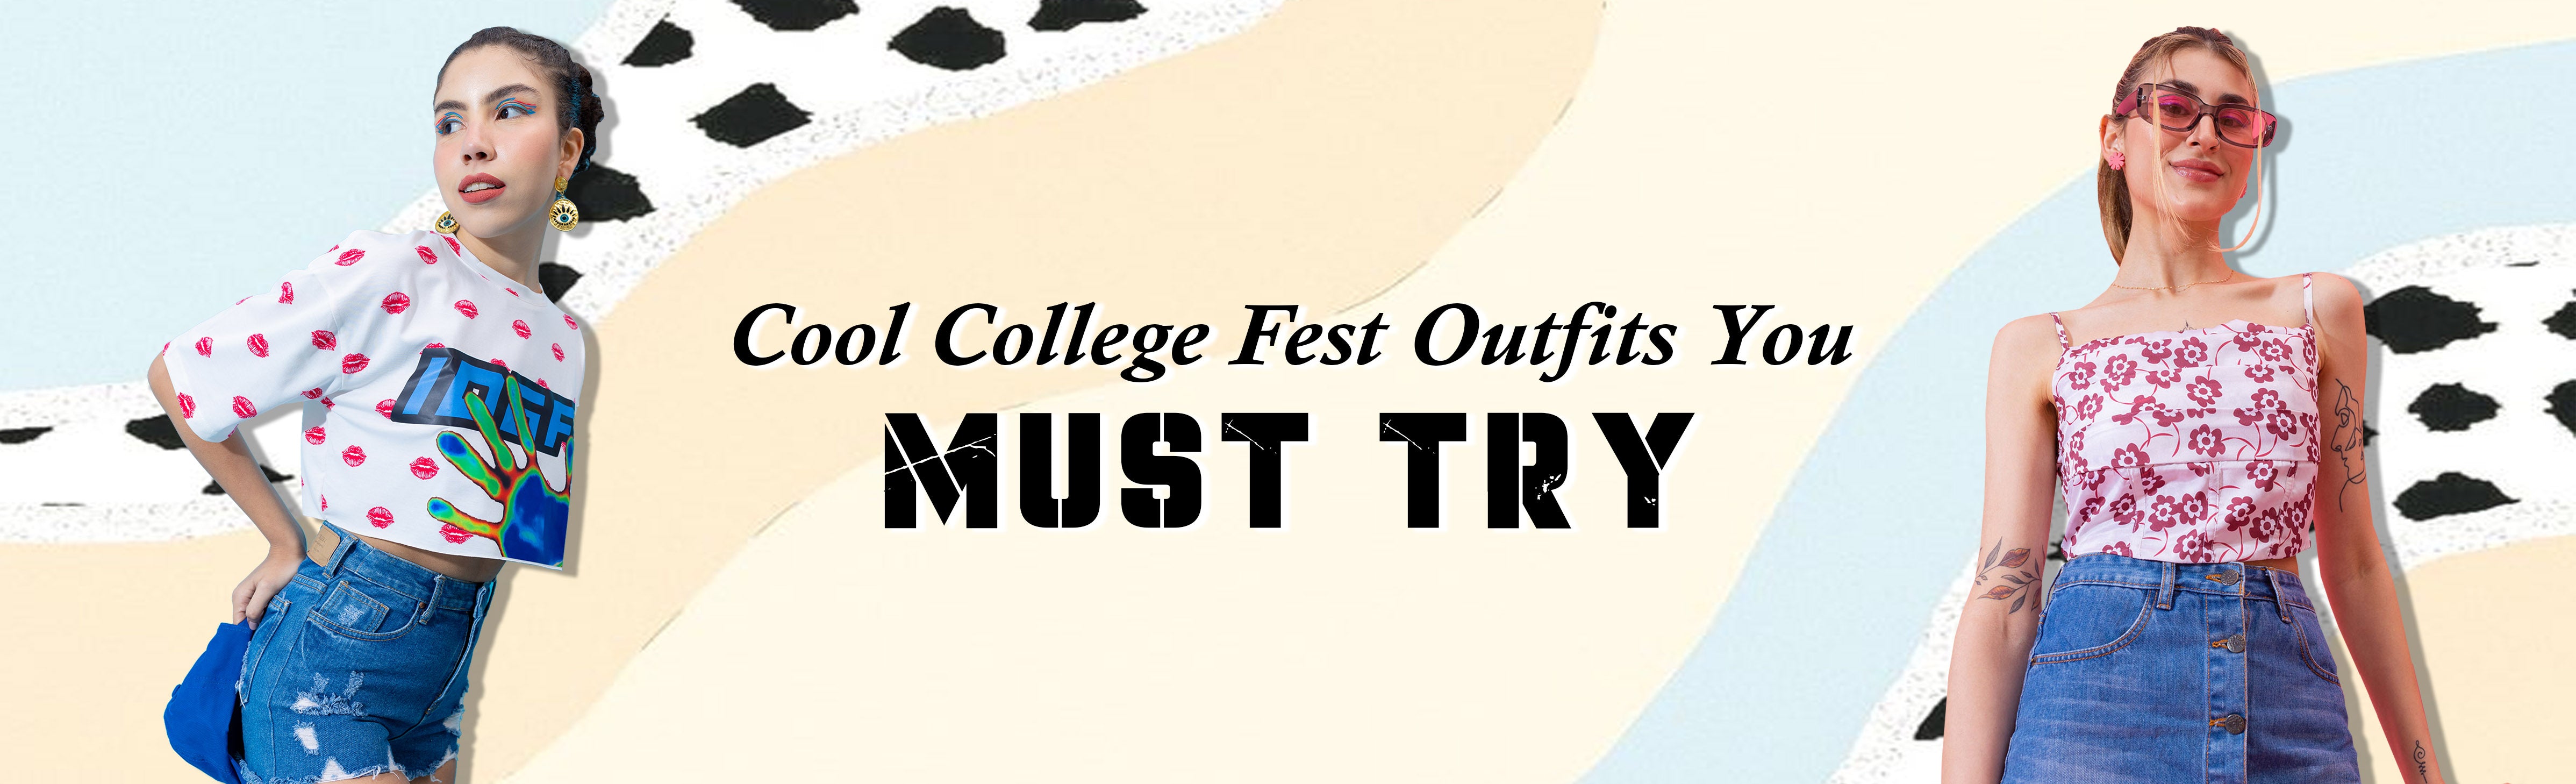 Cool College Fest Outfits You Must Try!